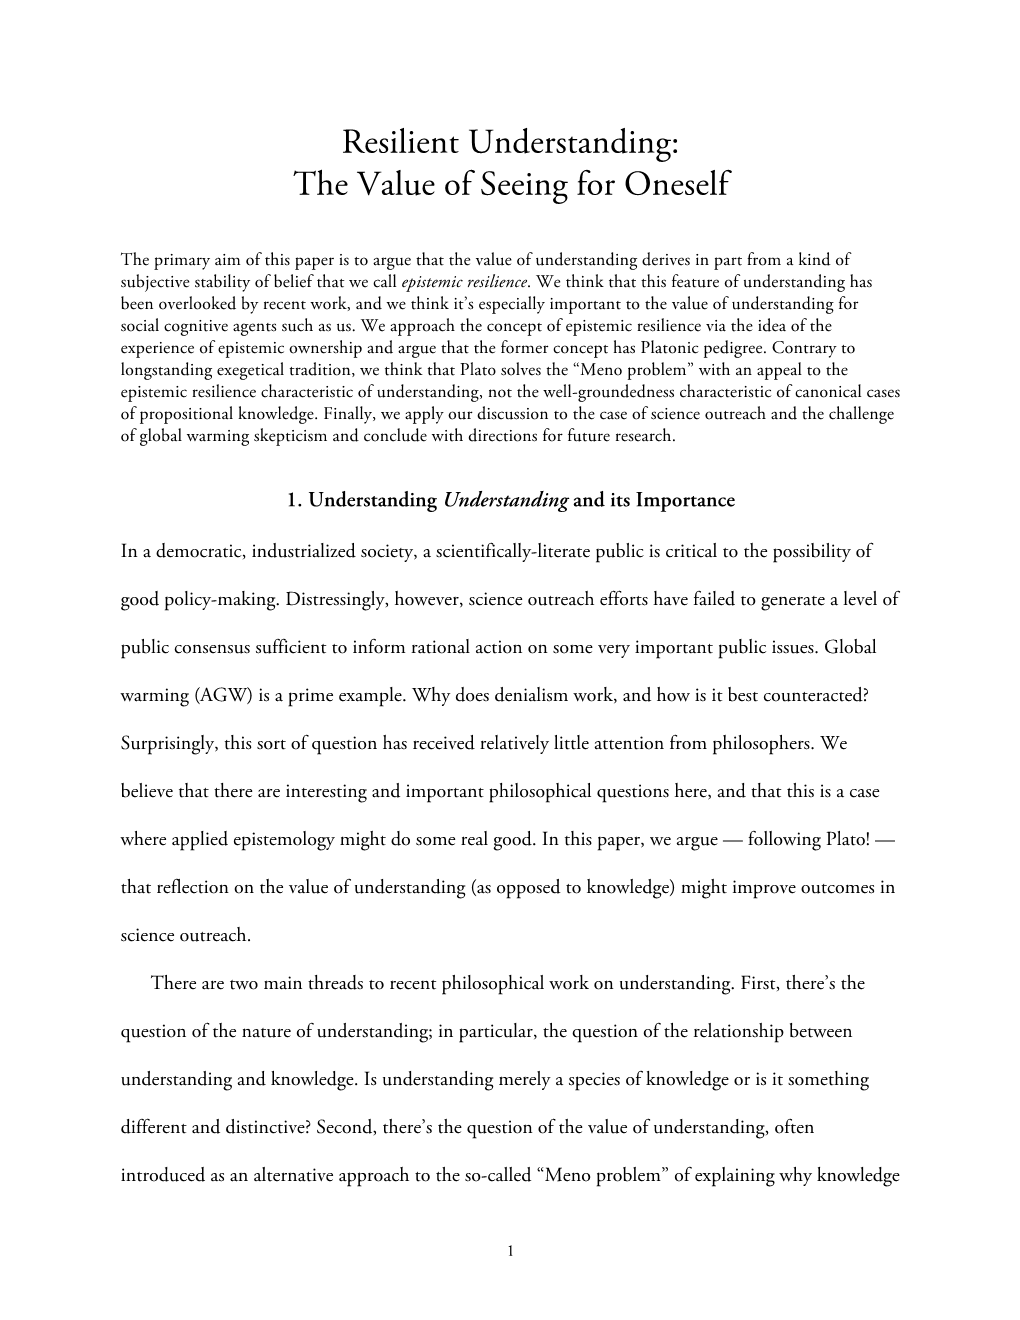 Resilient Understanding: the Value of Seeing for Oneself